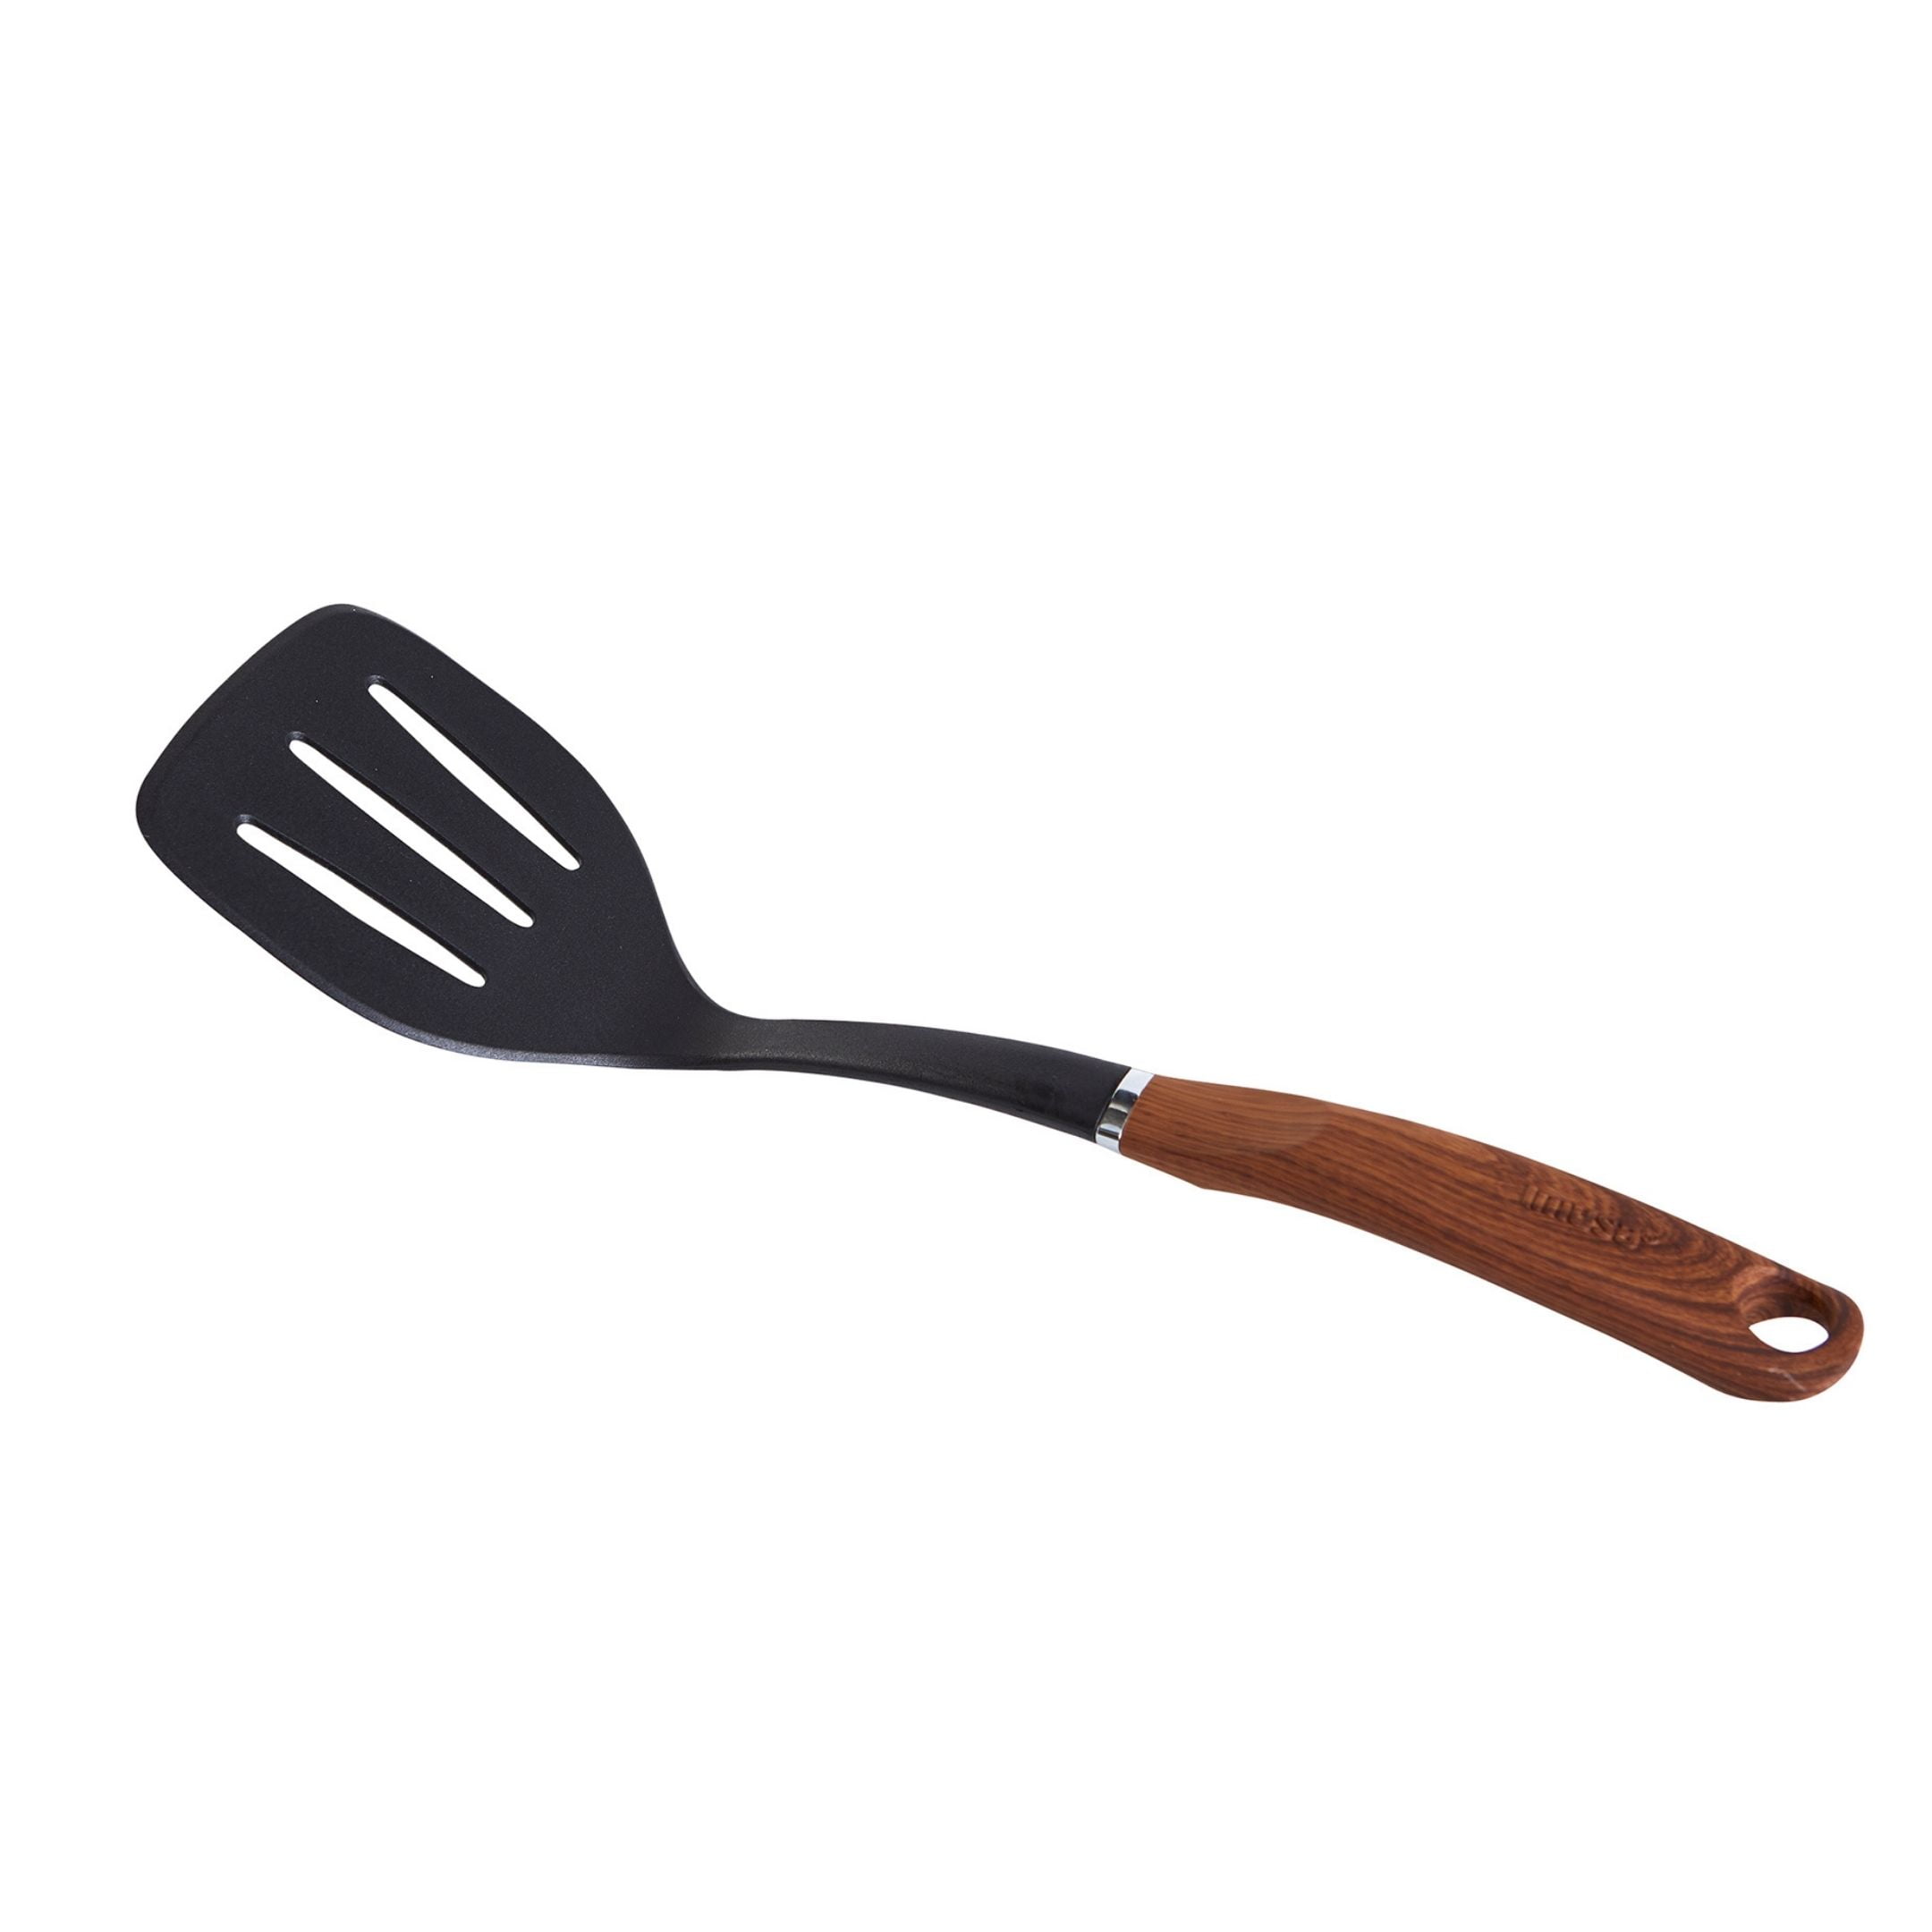 Imusa Nylon Slotted Turner with Woodlook Handle